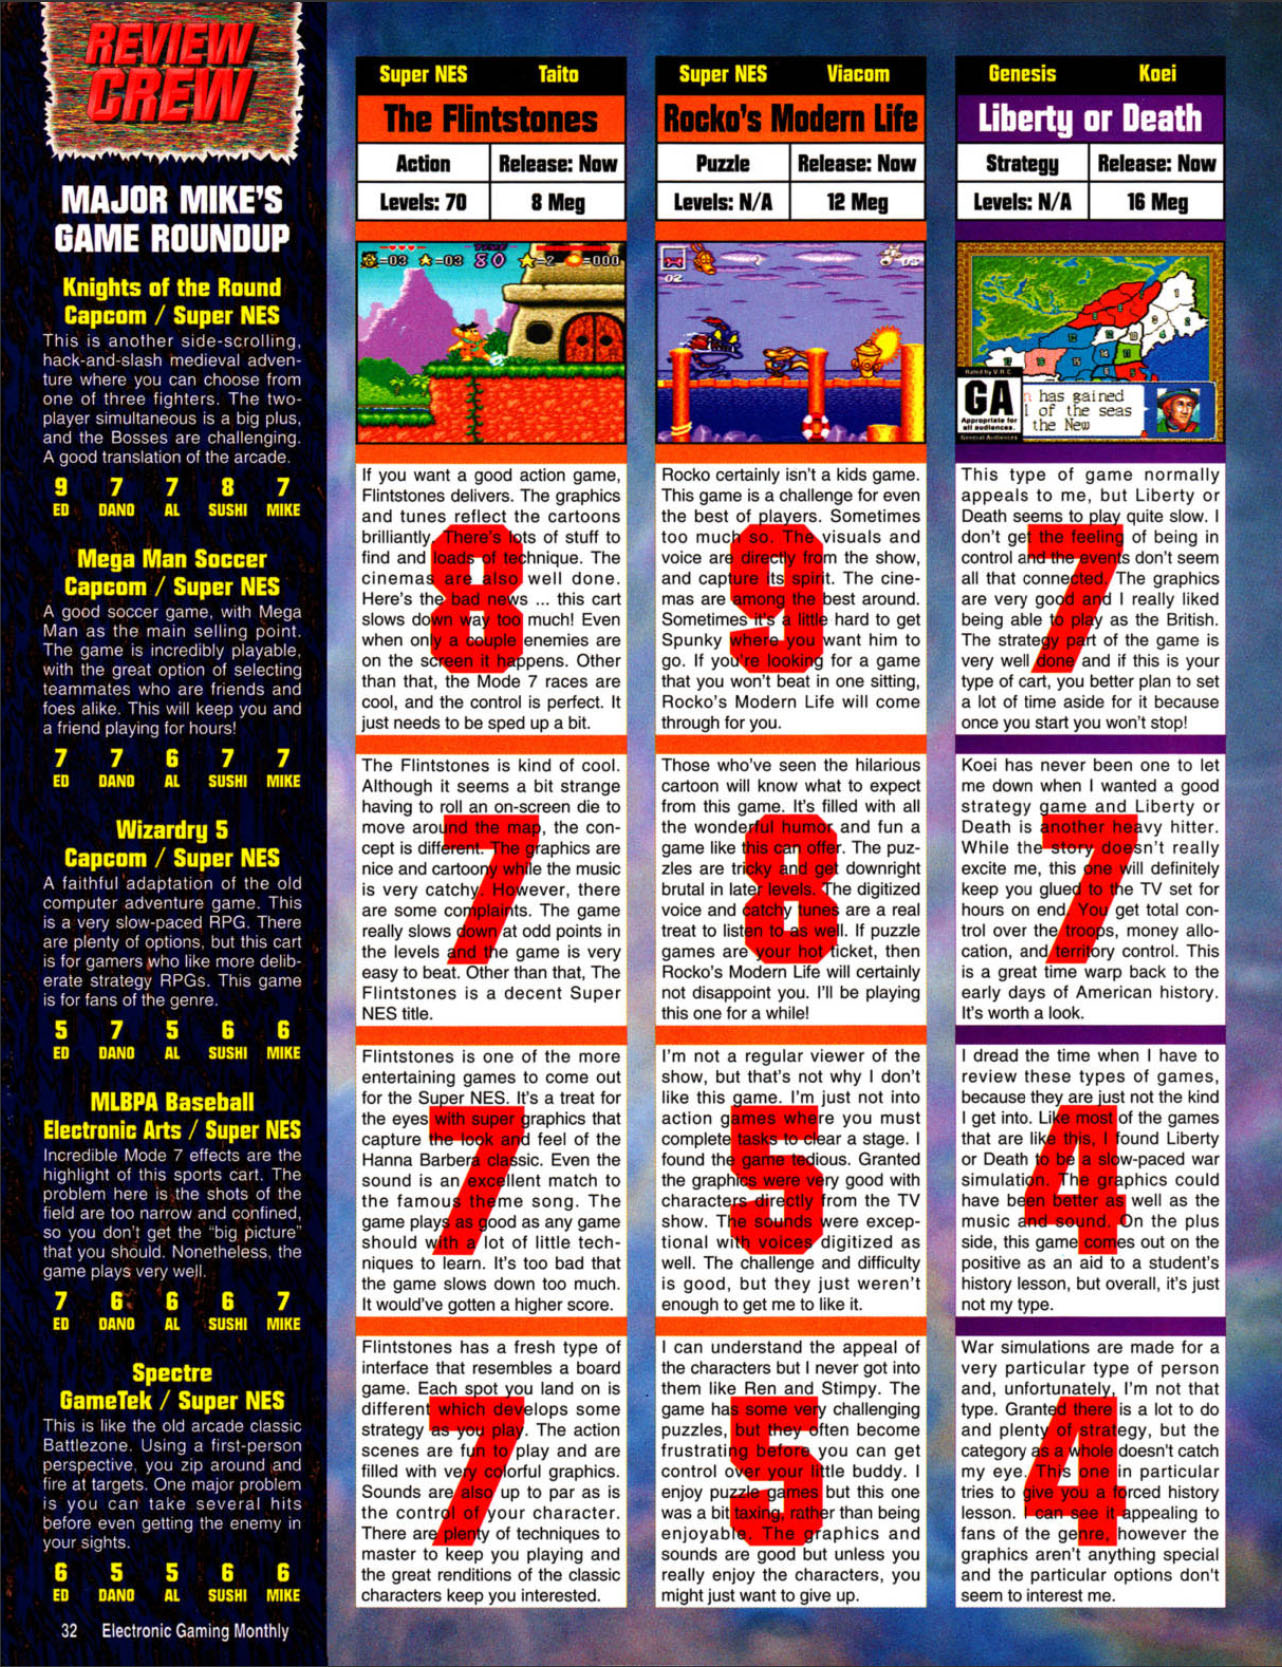 MLBPA Baseball Review, Electronic Gaming Monthly May 1994 page 32